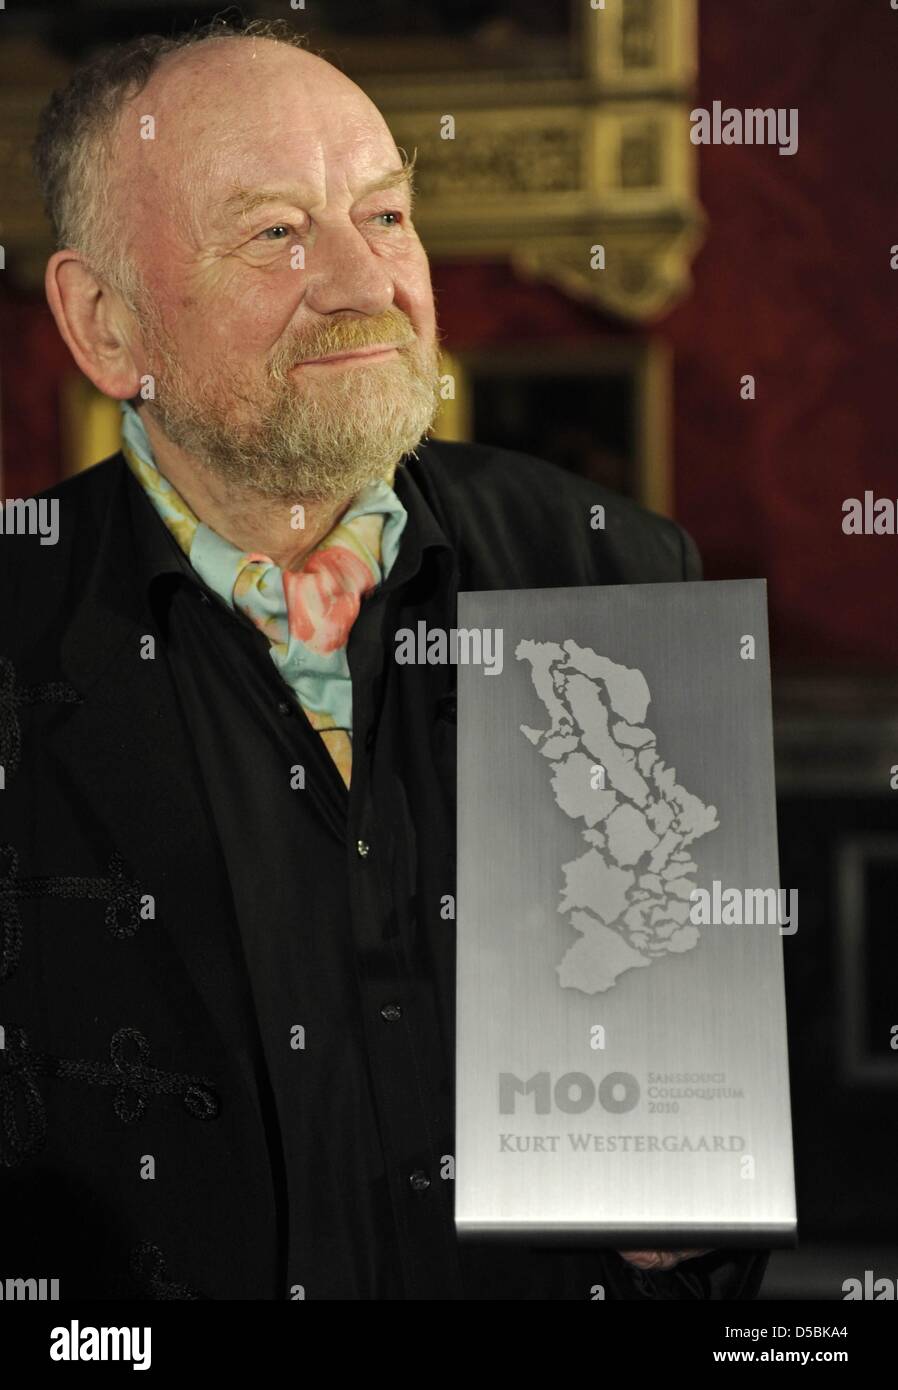 Danish cartoonist Kurt Westergaard poses with his award after receiving the M100 Media Prize 2010 in Potsdam, eastern Germany, September 8, 2010. Westergaard drew the most controversial of 12 caricatures of the Prophet Mohammed, first published in a Danish newspaper in 2005, which many Muslims considered offensive. The drawings sparked protests in January and February 2006 that cul Stock Photo